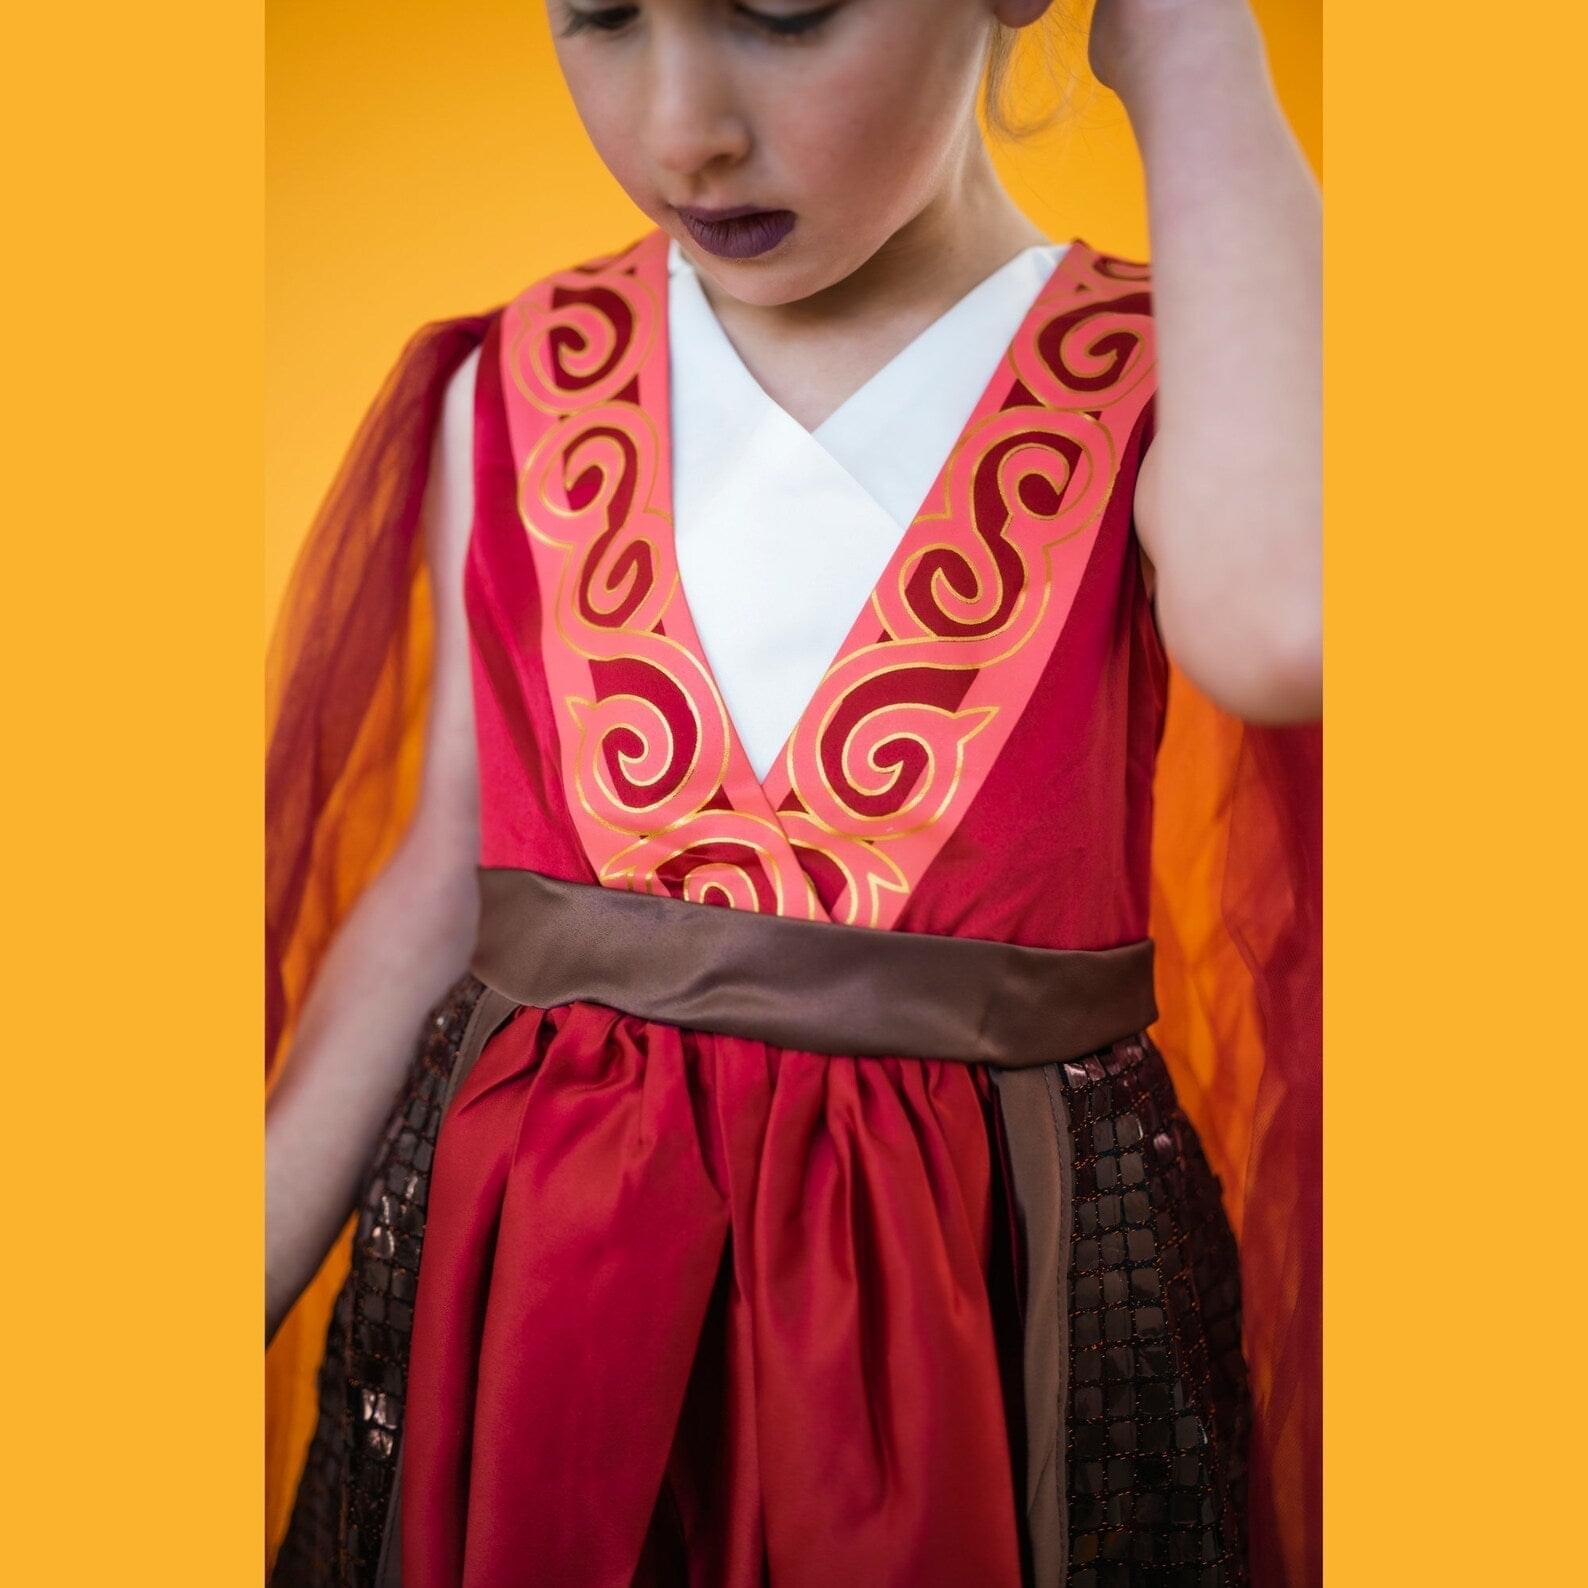 Be a Warrior Princess with a Mulan Deluxe Dress and Costume